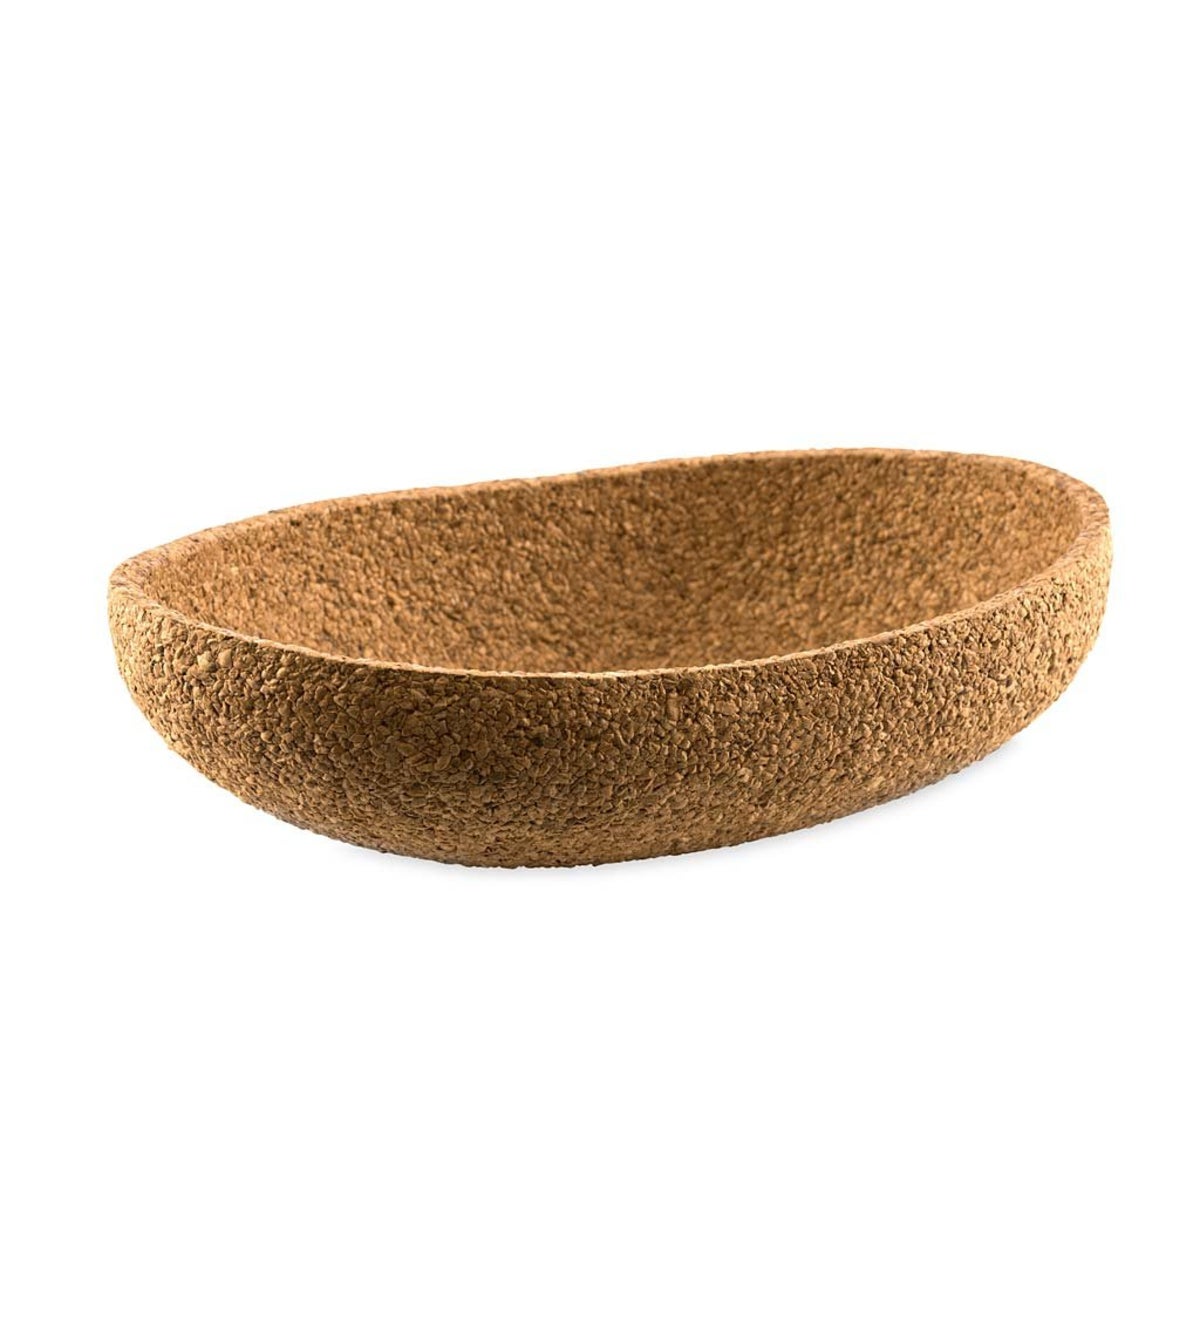 Sustainable Cork Serving Pieces